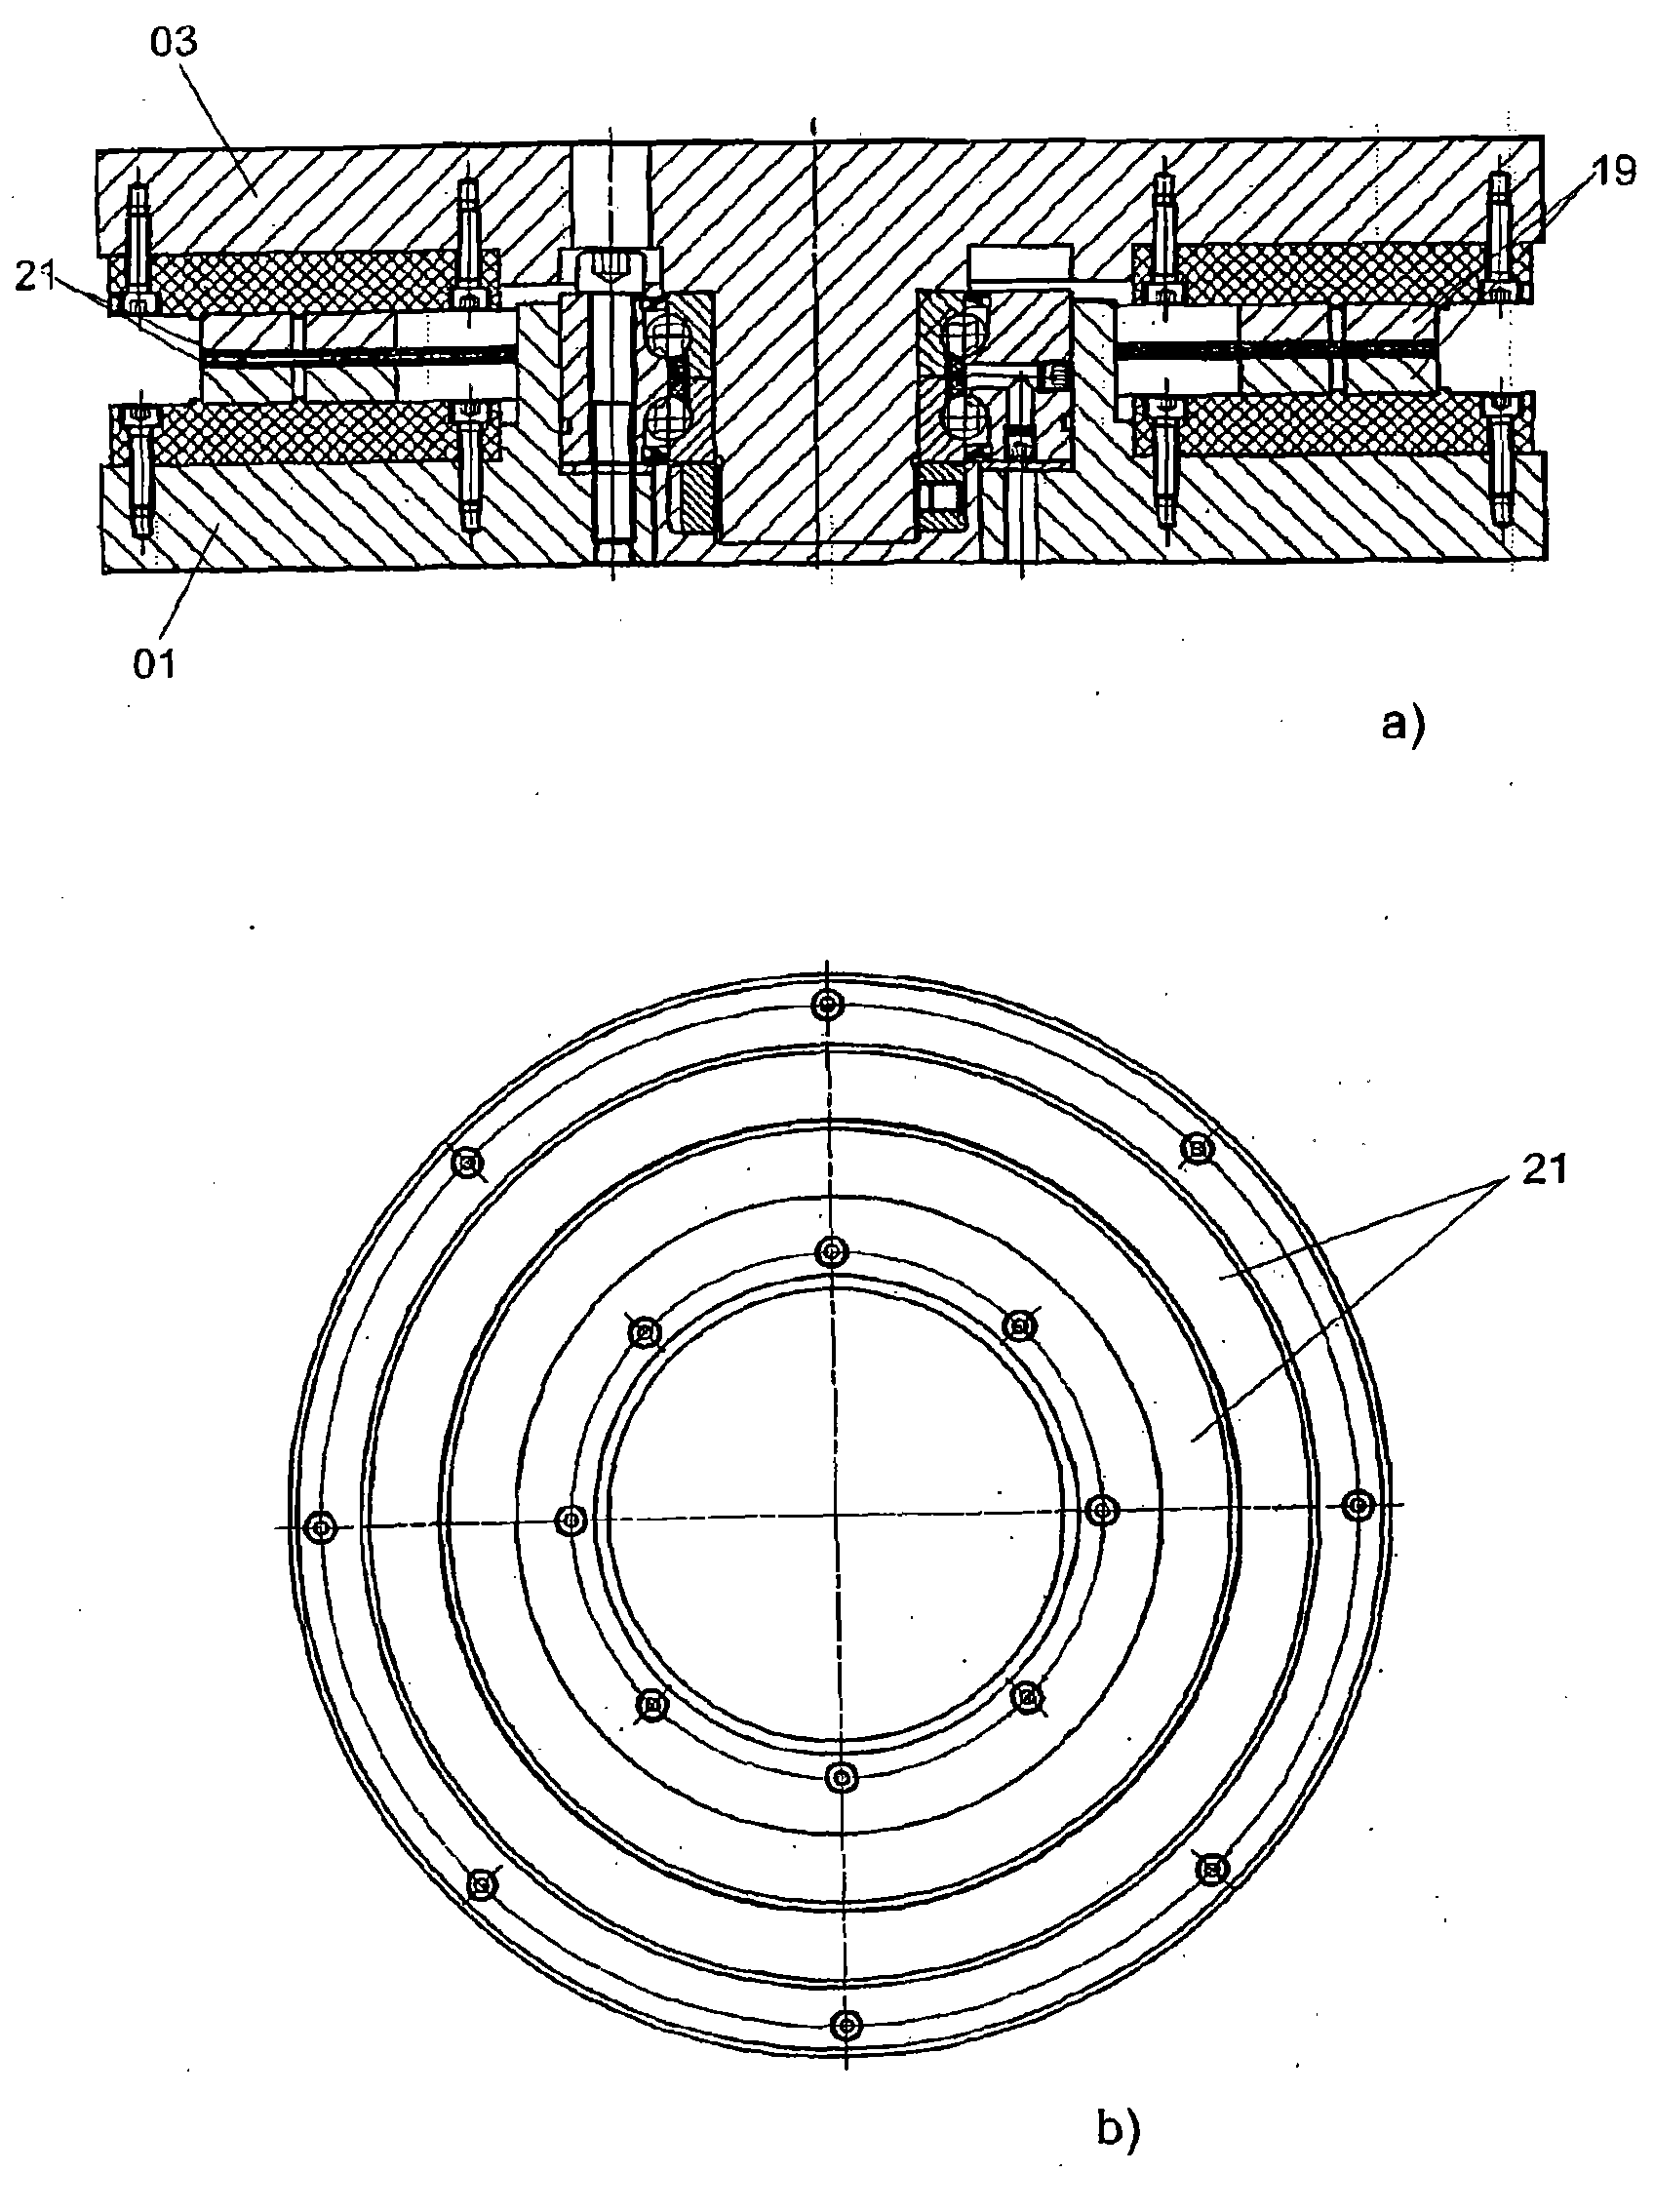 Bearing assembly for machine table with magnetic load relieving mechanism